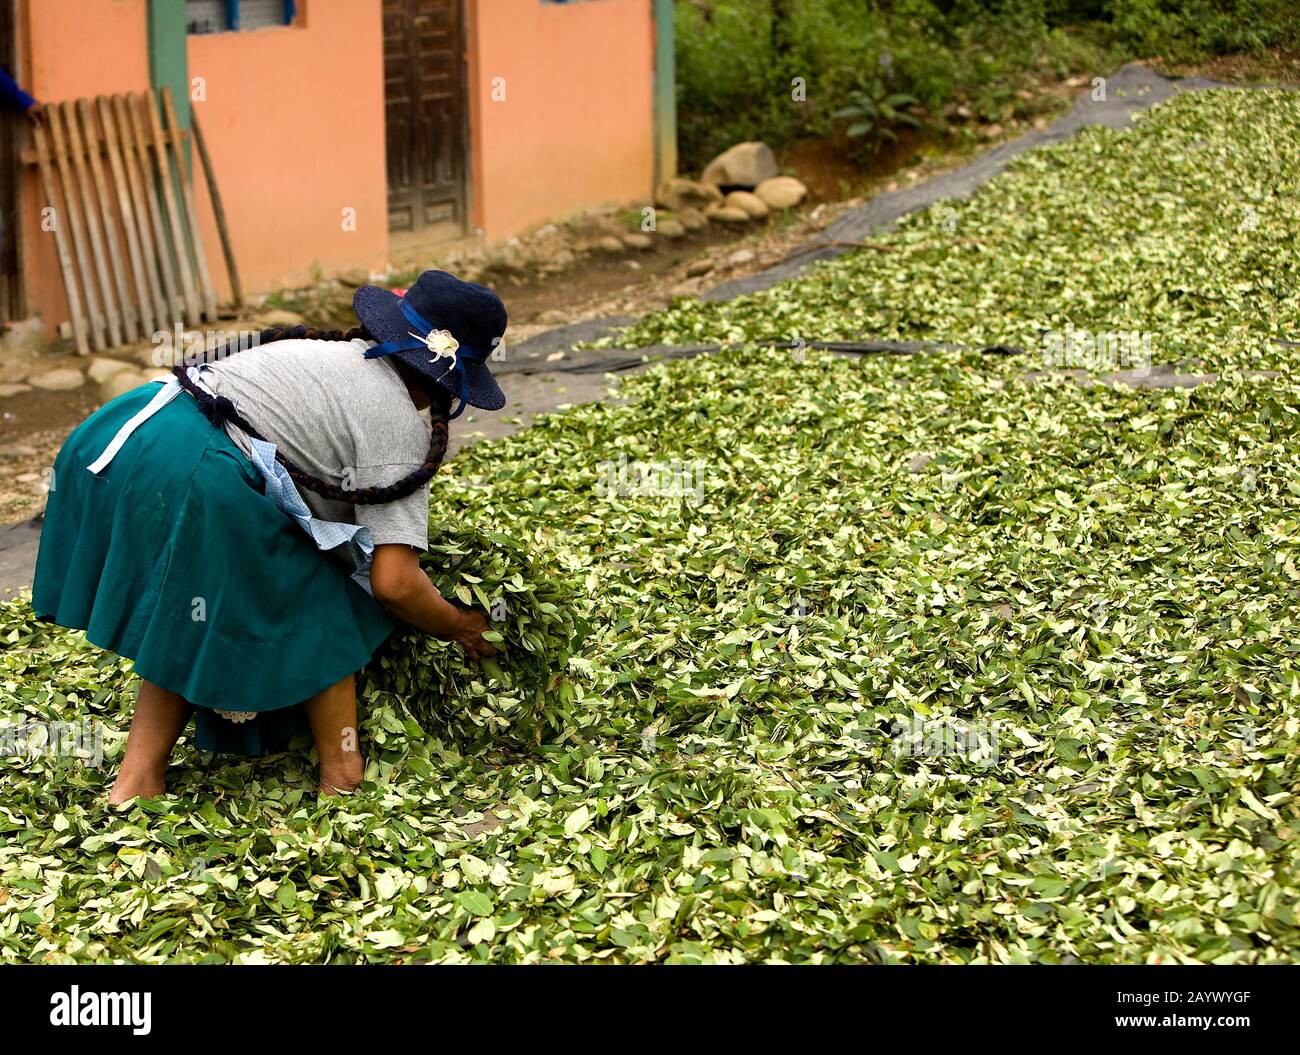 Coca, erythroxylum coca, Leafs producing Cocaine, Woman mooving Drying Leaves at Pilcopata Village inb Peru Stock Photo